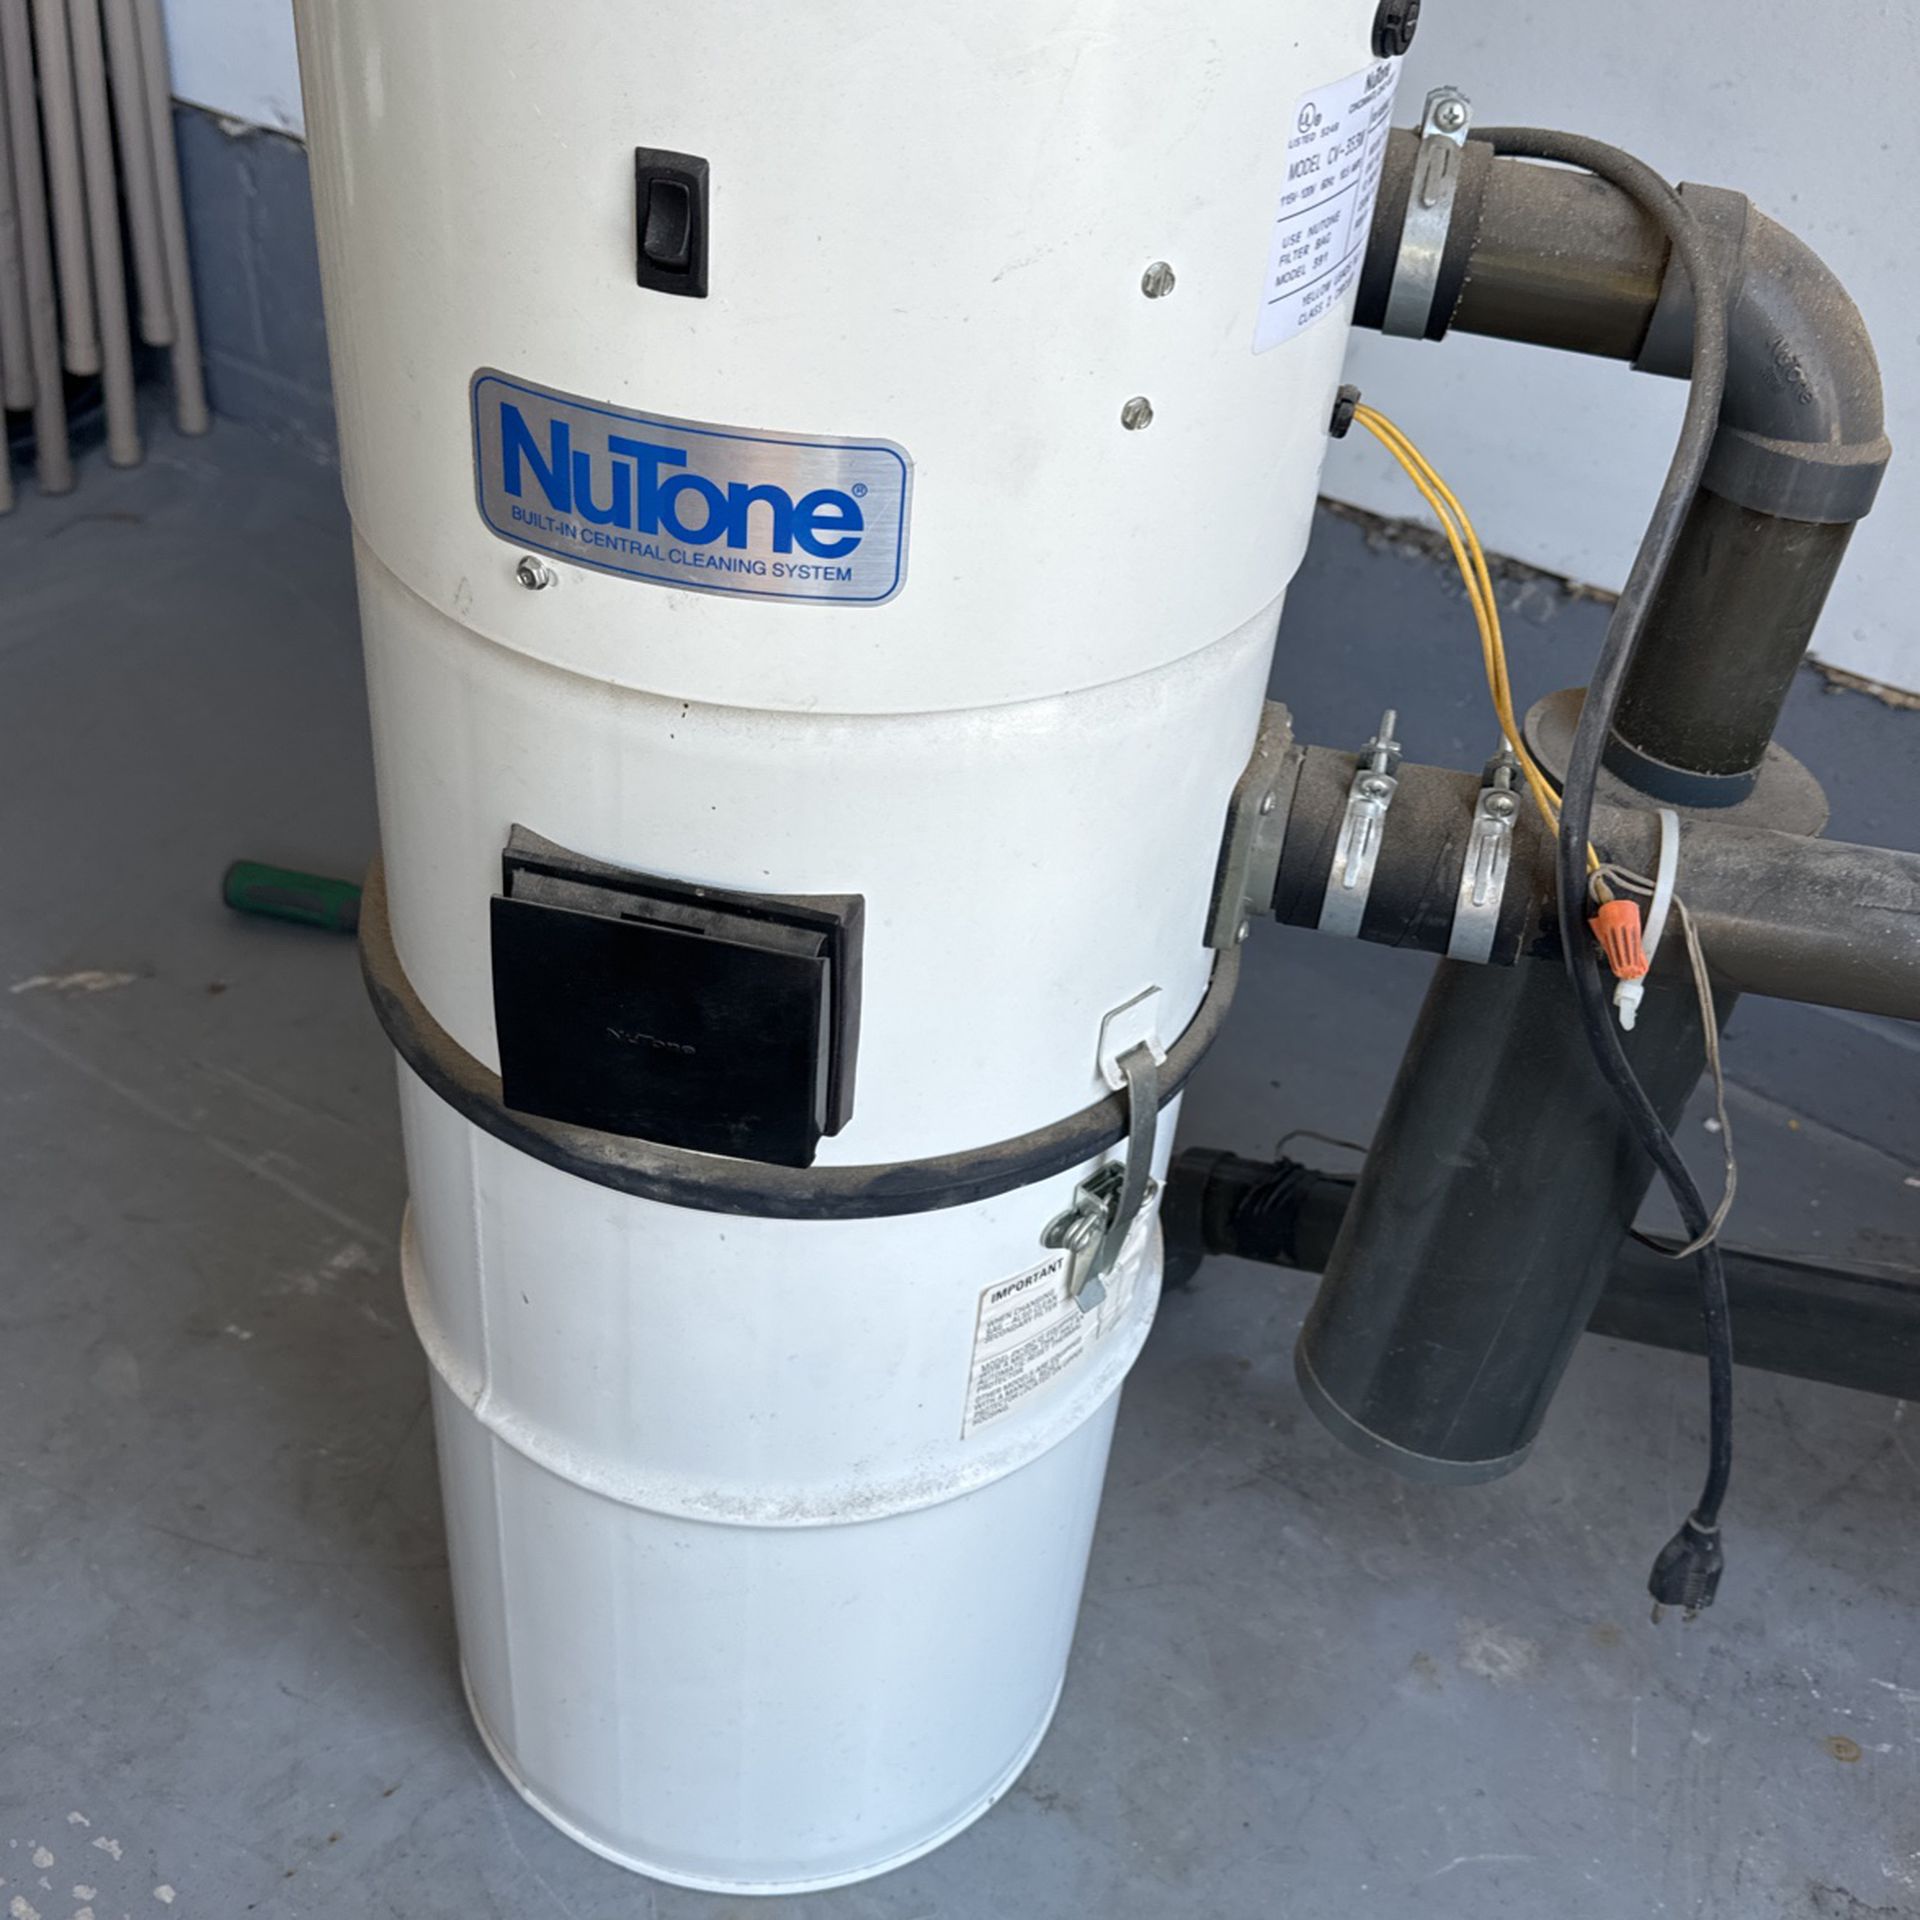 Nutone Built In Central Cleaning System 